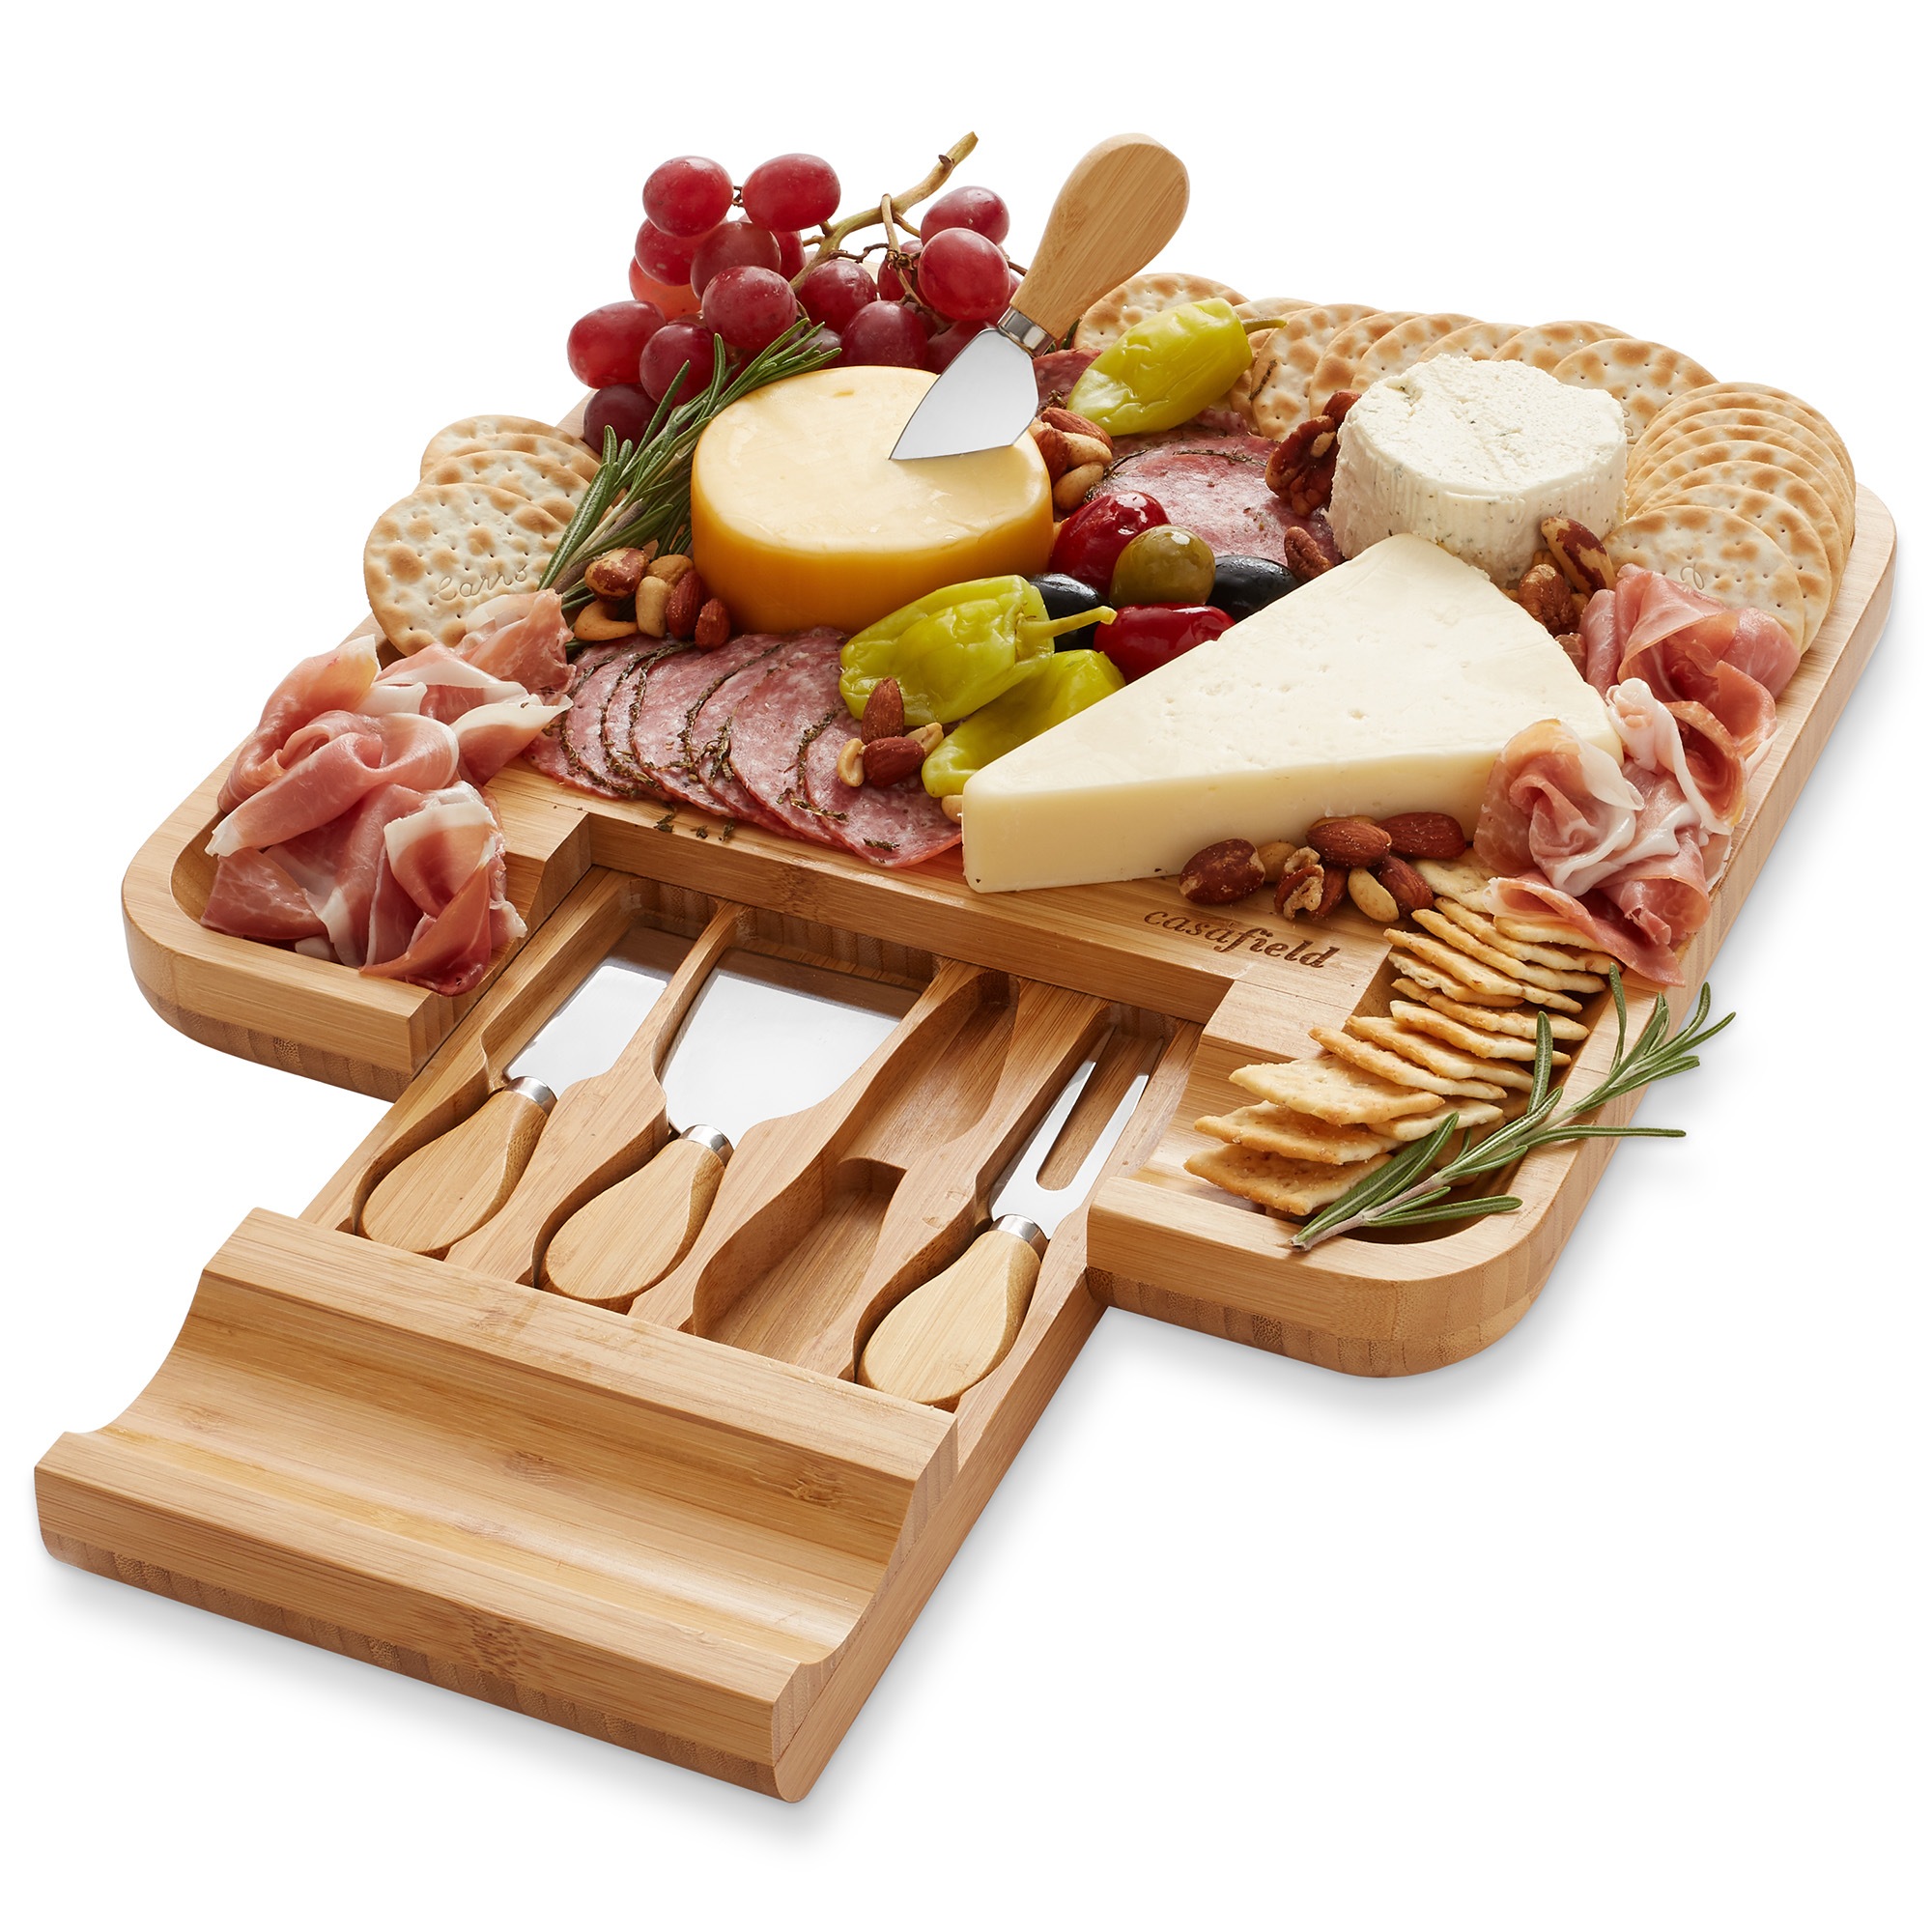 Casafield Organic Bamboo Cheese Cutting Board & Knife Gift Set - Wooden Serving Tray for Charcuterie Meat Platter, Fruit & Crackers - Slide Out Drawer with 4 Stainless Steel Knives - image 1 of 7